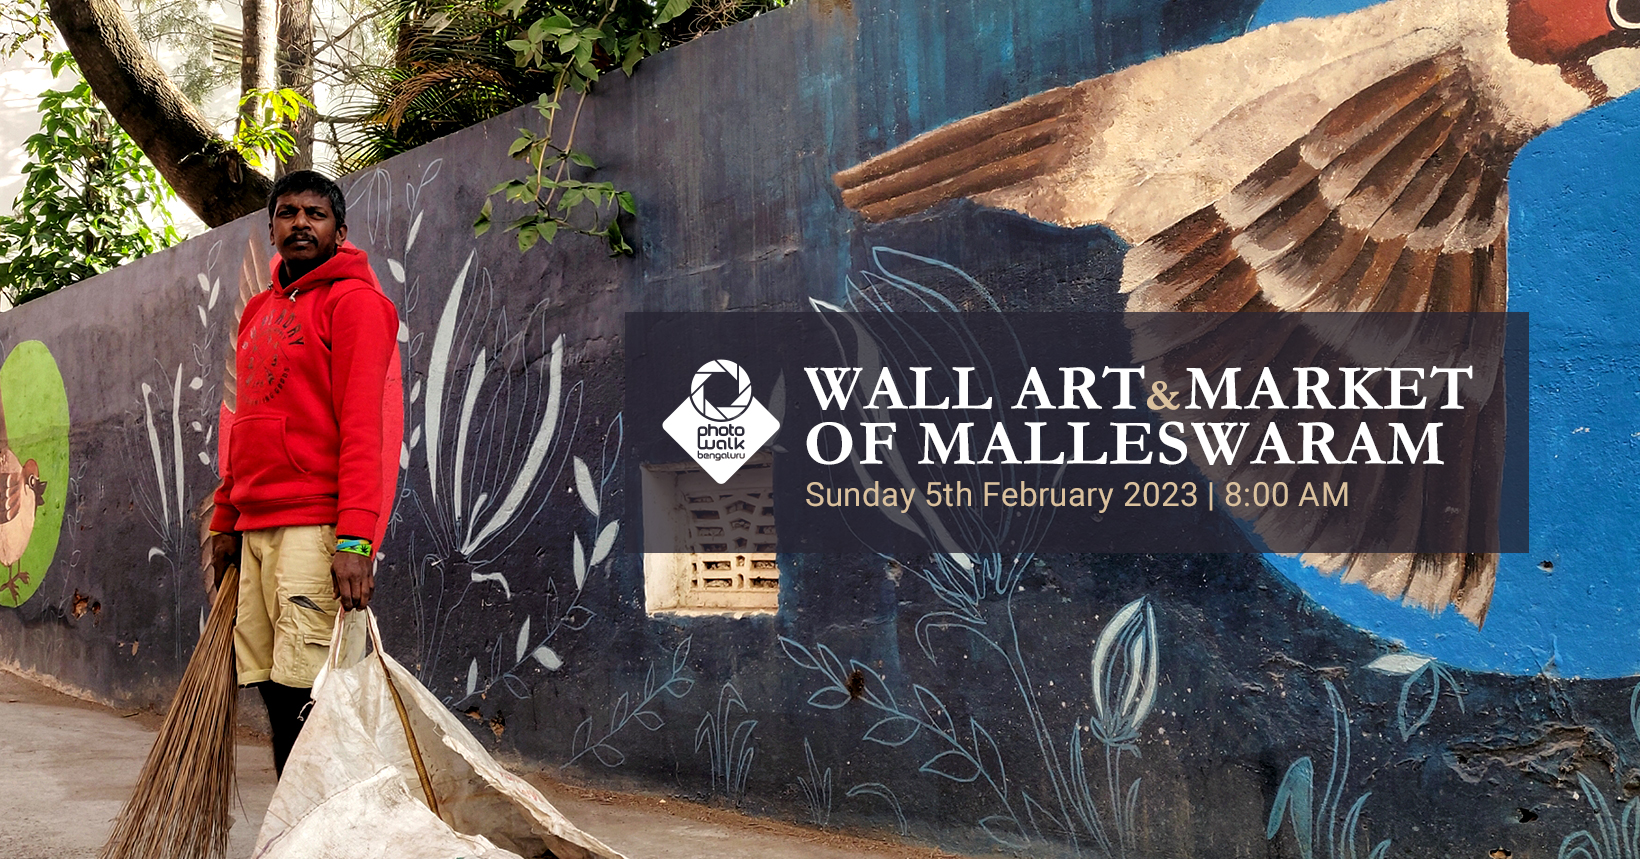 You are currently viewing Wall Art & Market of Malleswaram